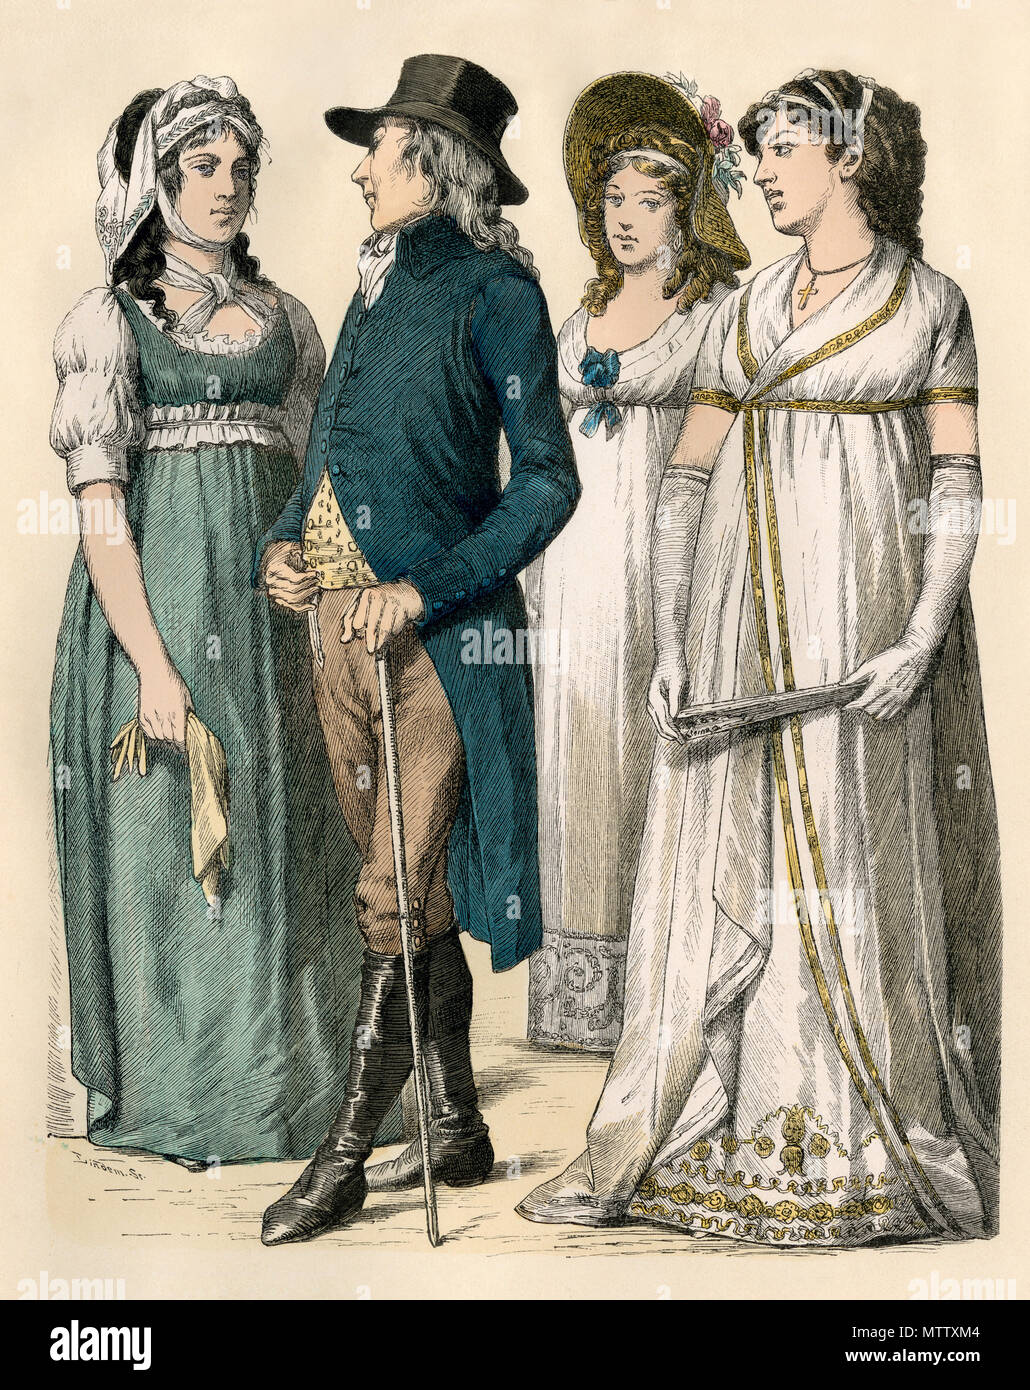 Berliners of the 1790s. Hand-colored print Stock Photo